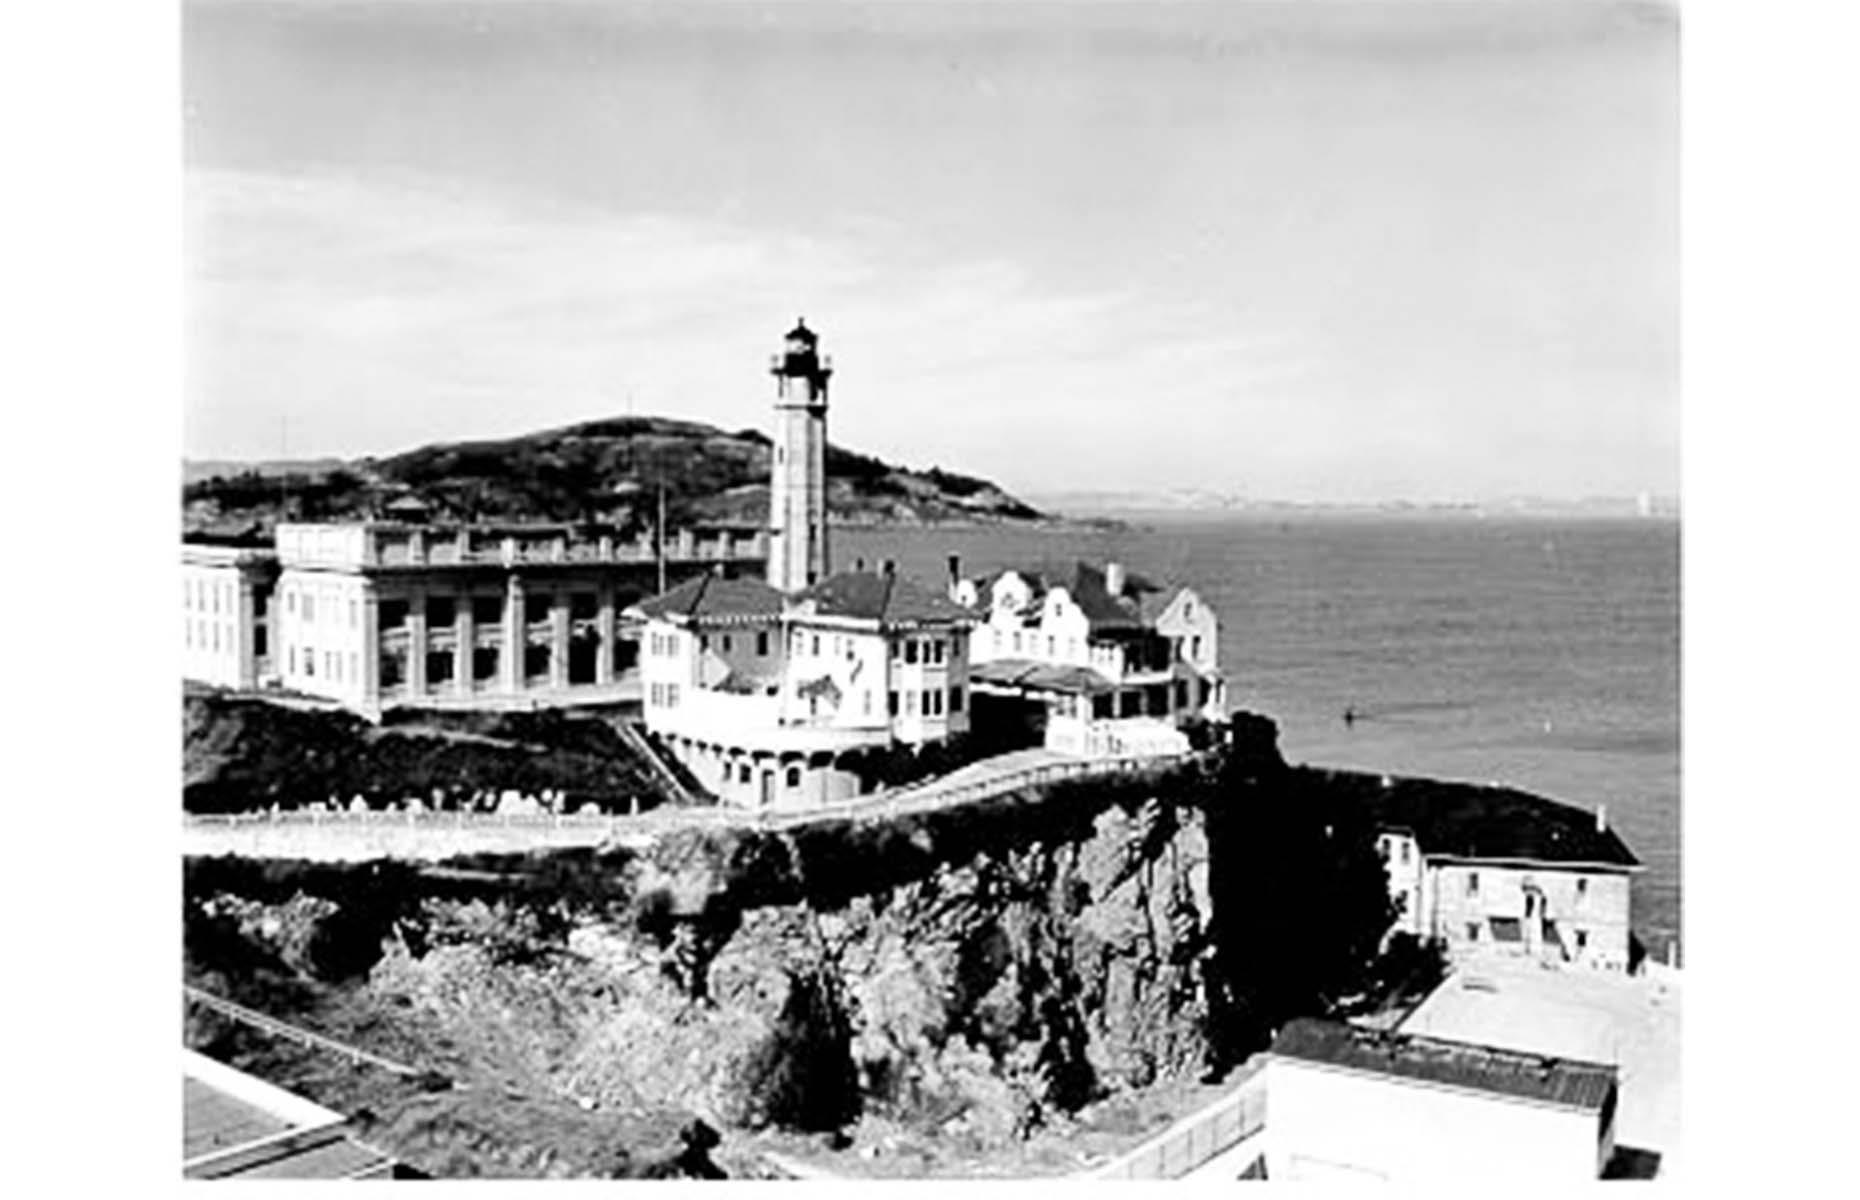 <p>During the island's early days, it also served as a beacon. In fact, it became the very first lighthouse to illuminate America's west coast when it was finished in 1854. It's been through several iterations since, including the modern, automated structure added after the jail was closed in the 1960s. The lighthouse still shines brightly today.</p>